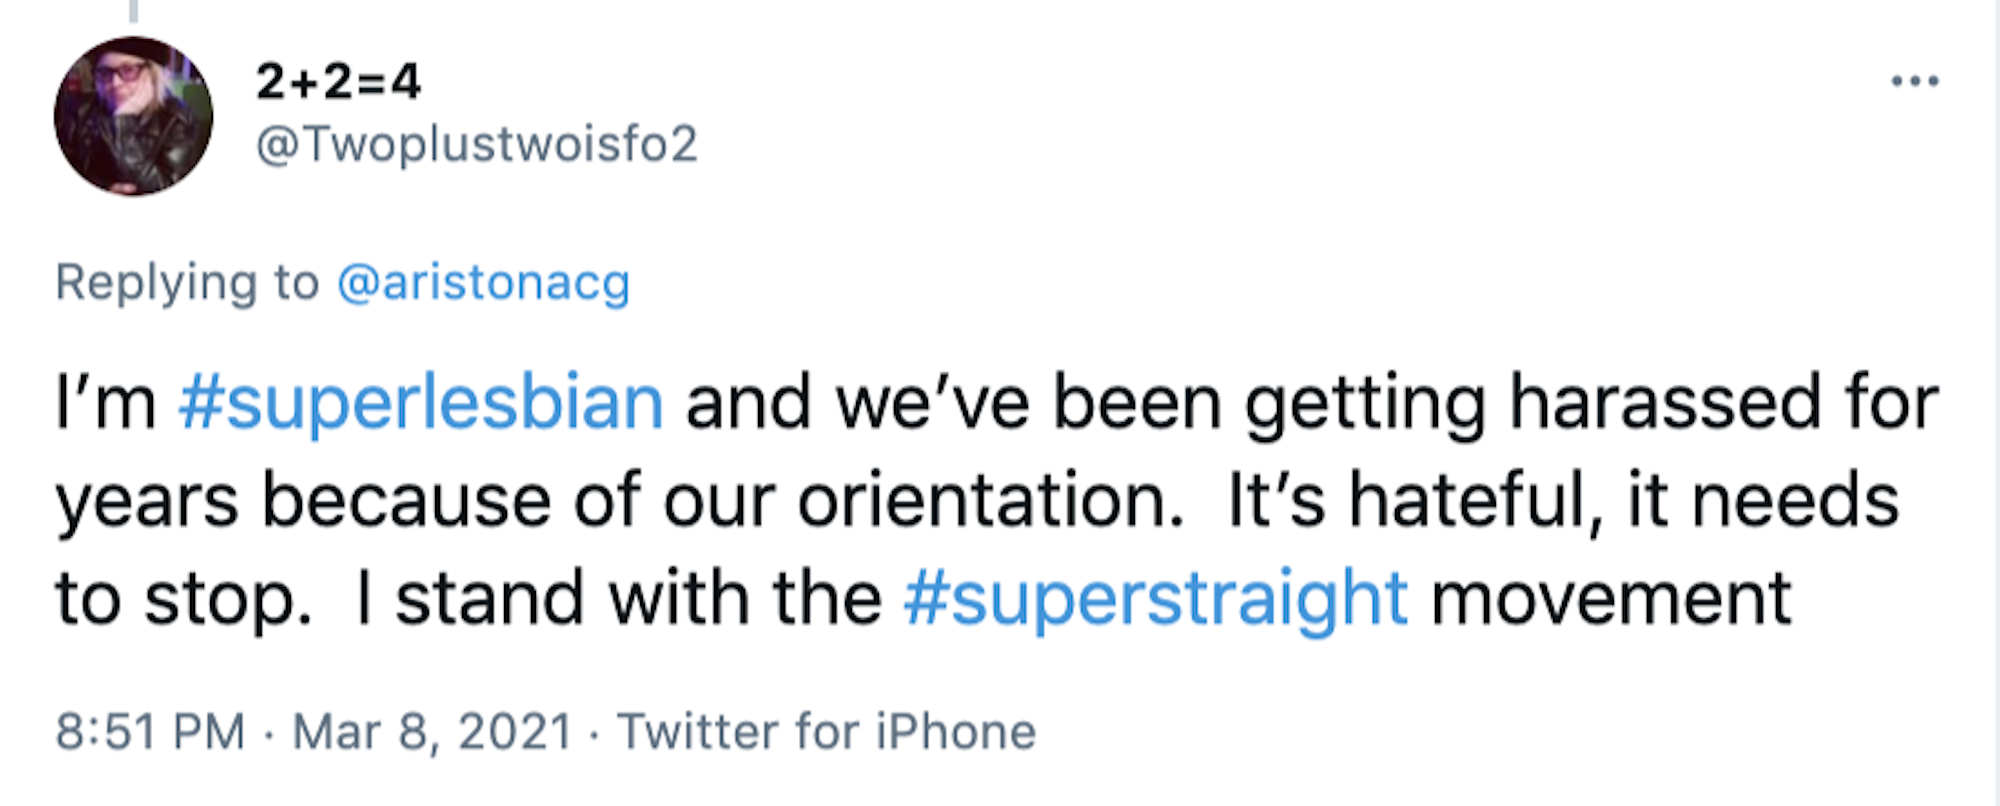 I’m #superlesbian and we’ve been getting harassed for years because of our orientation. It’s hateful, it needs to stop. I stand with the #superstraight movement